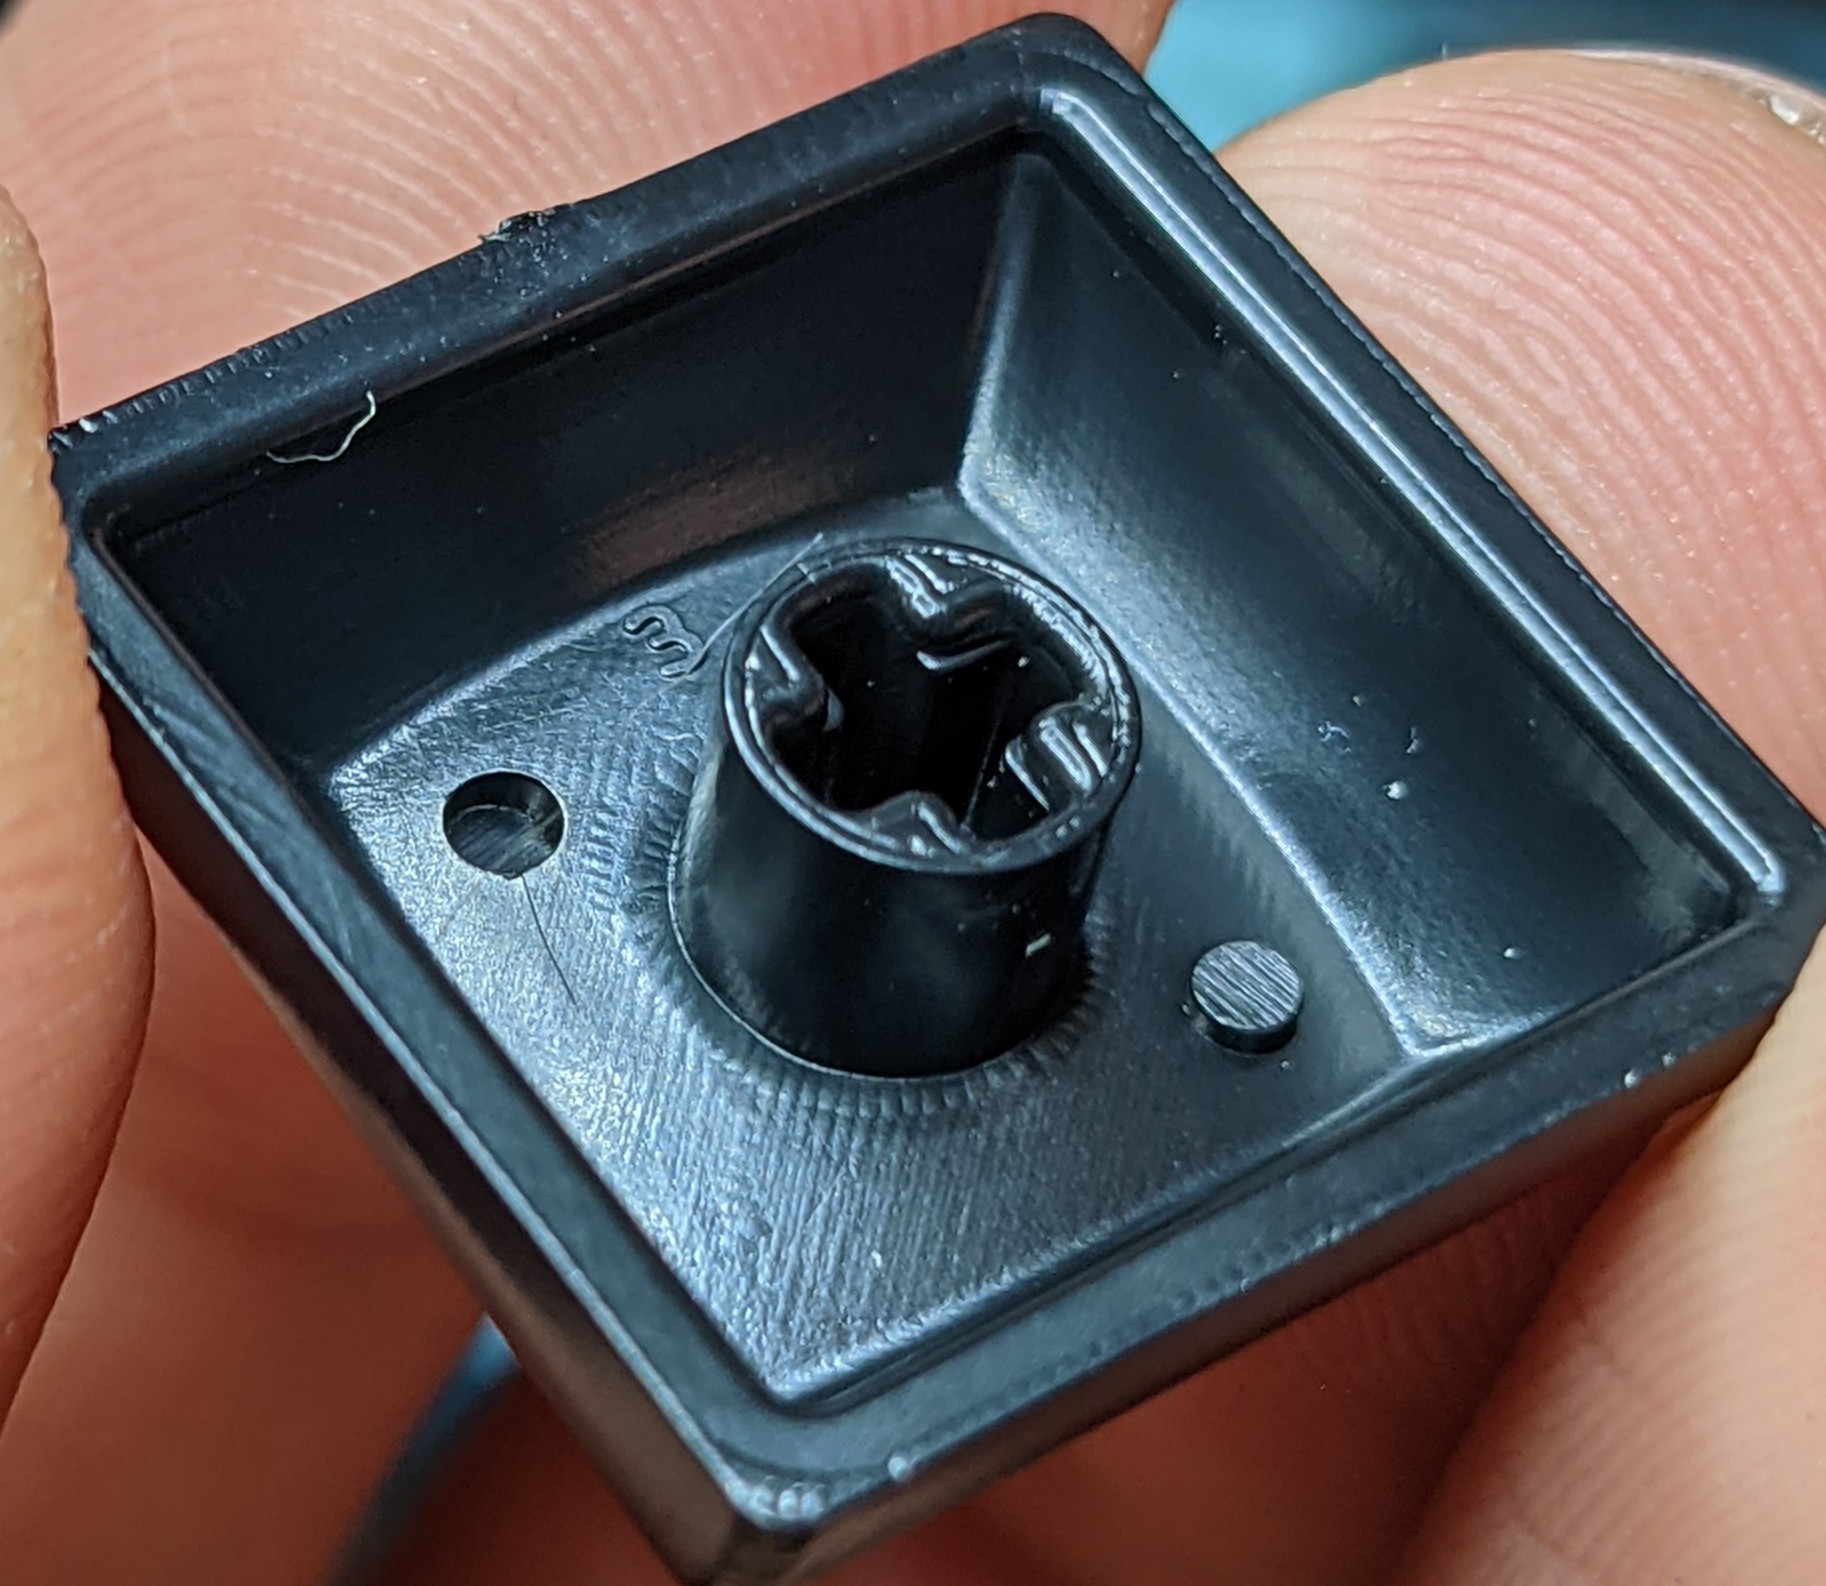 Closeup detail of the underside of a row 3 HuB keycap. The small '3' can be seen above the stem to indicate the row profile.